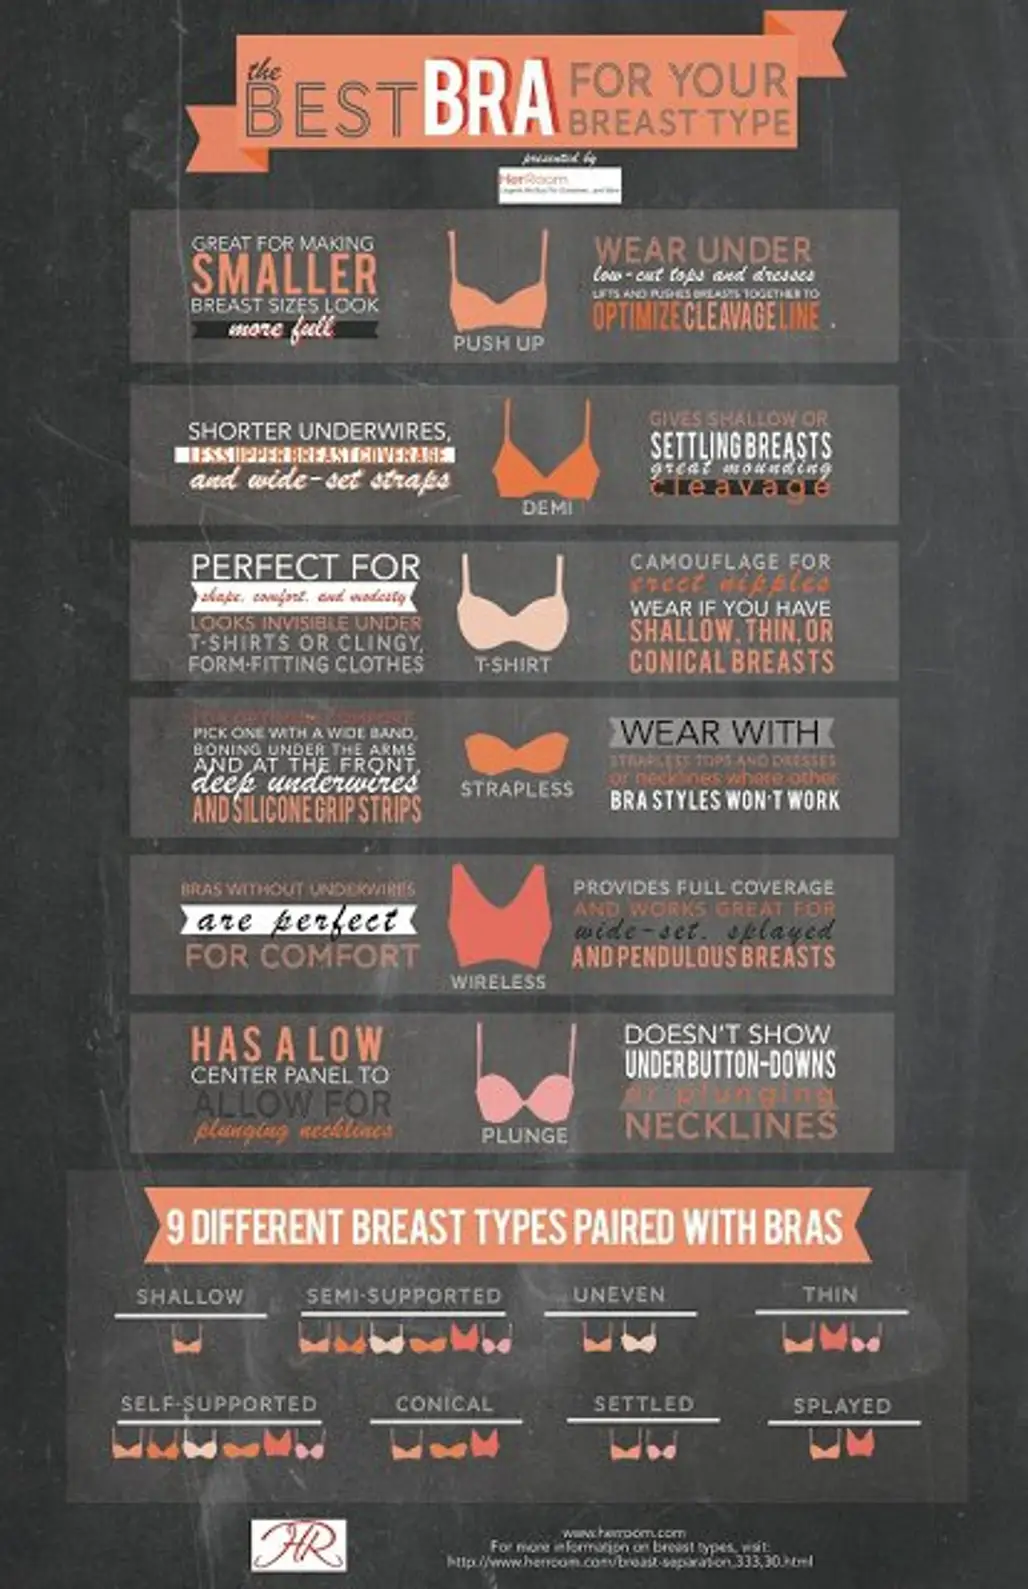 What is the Best Bra for You?